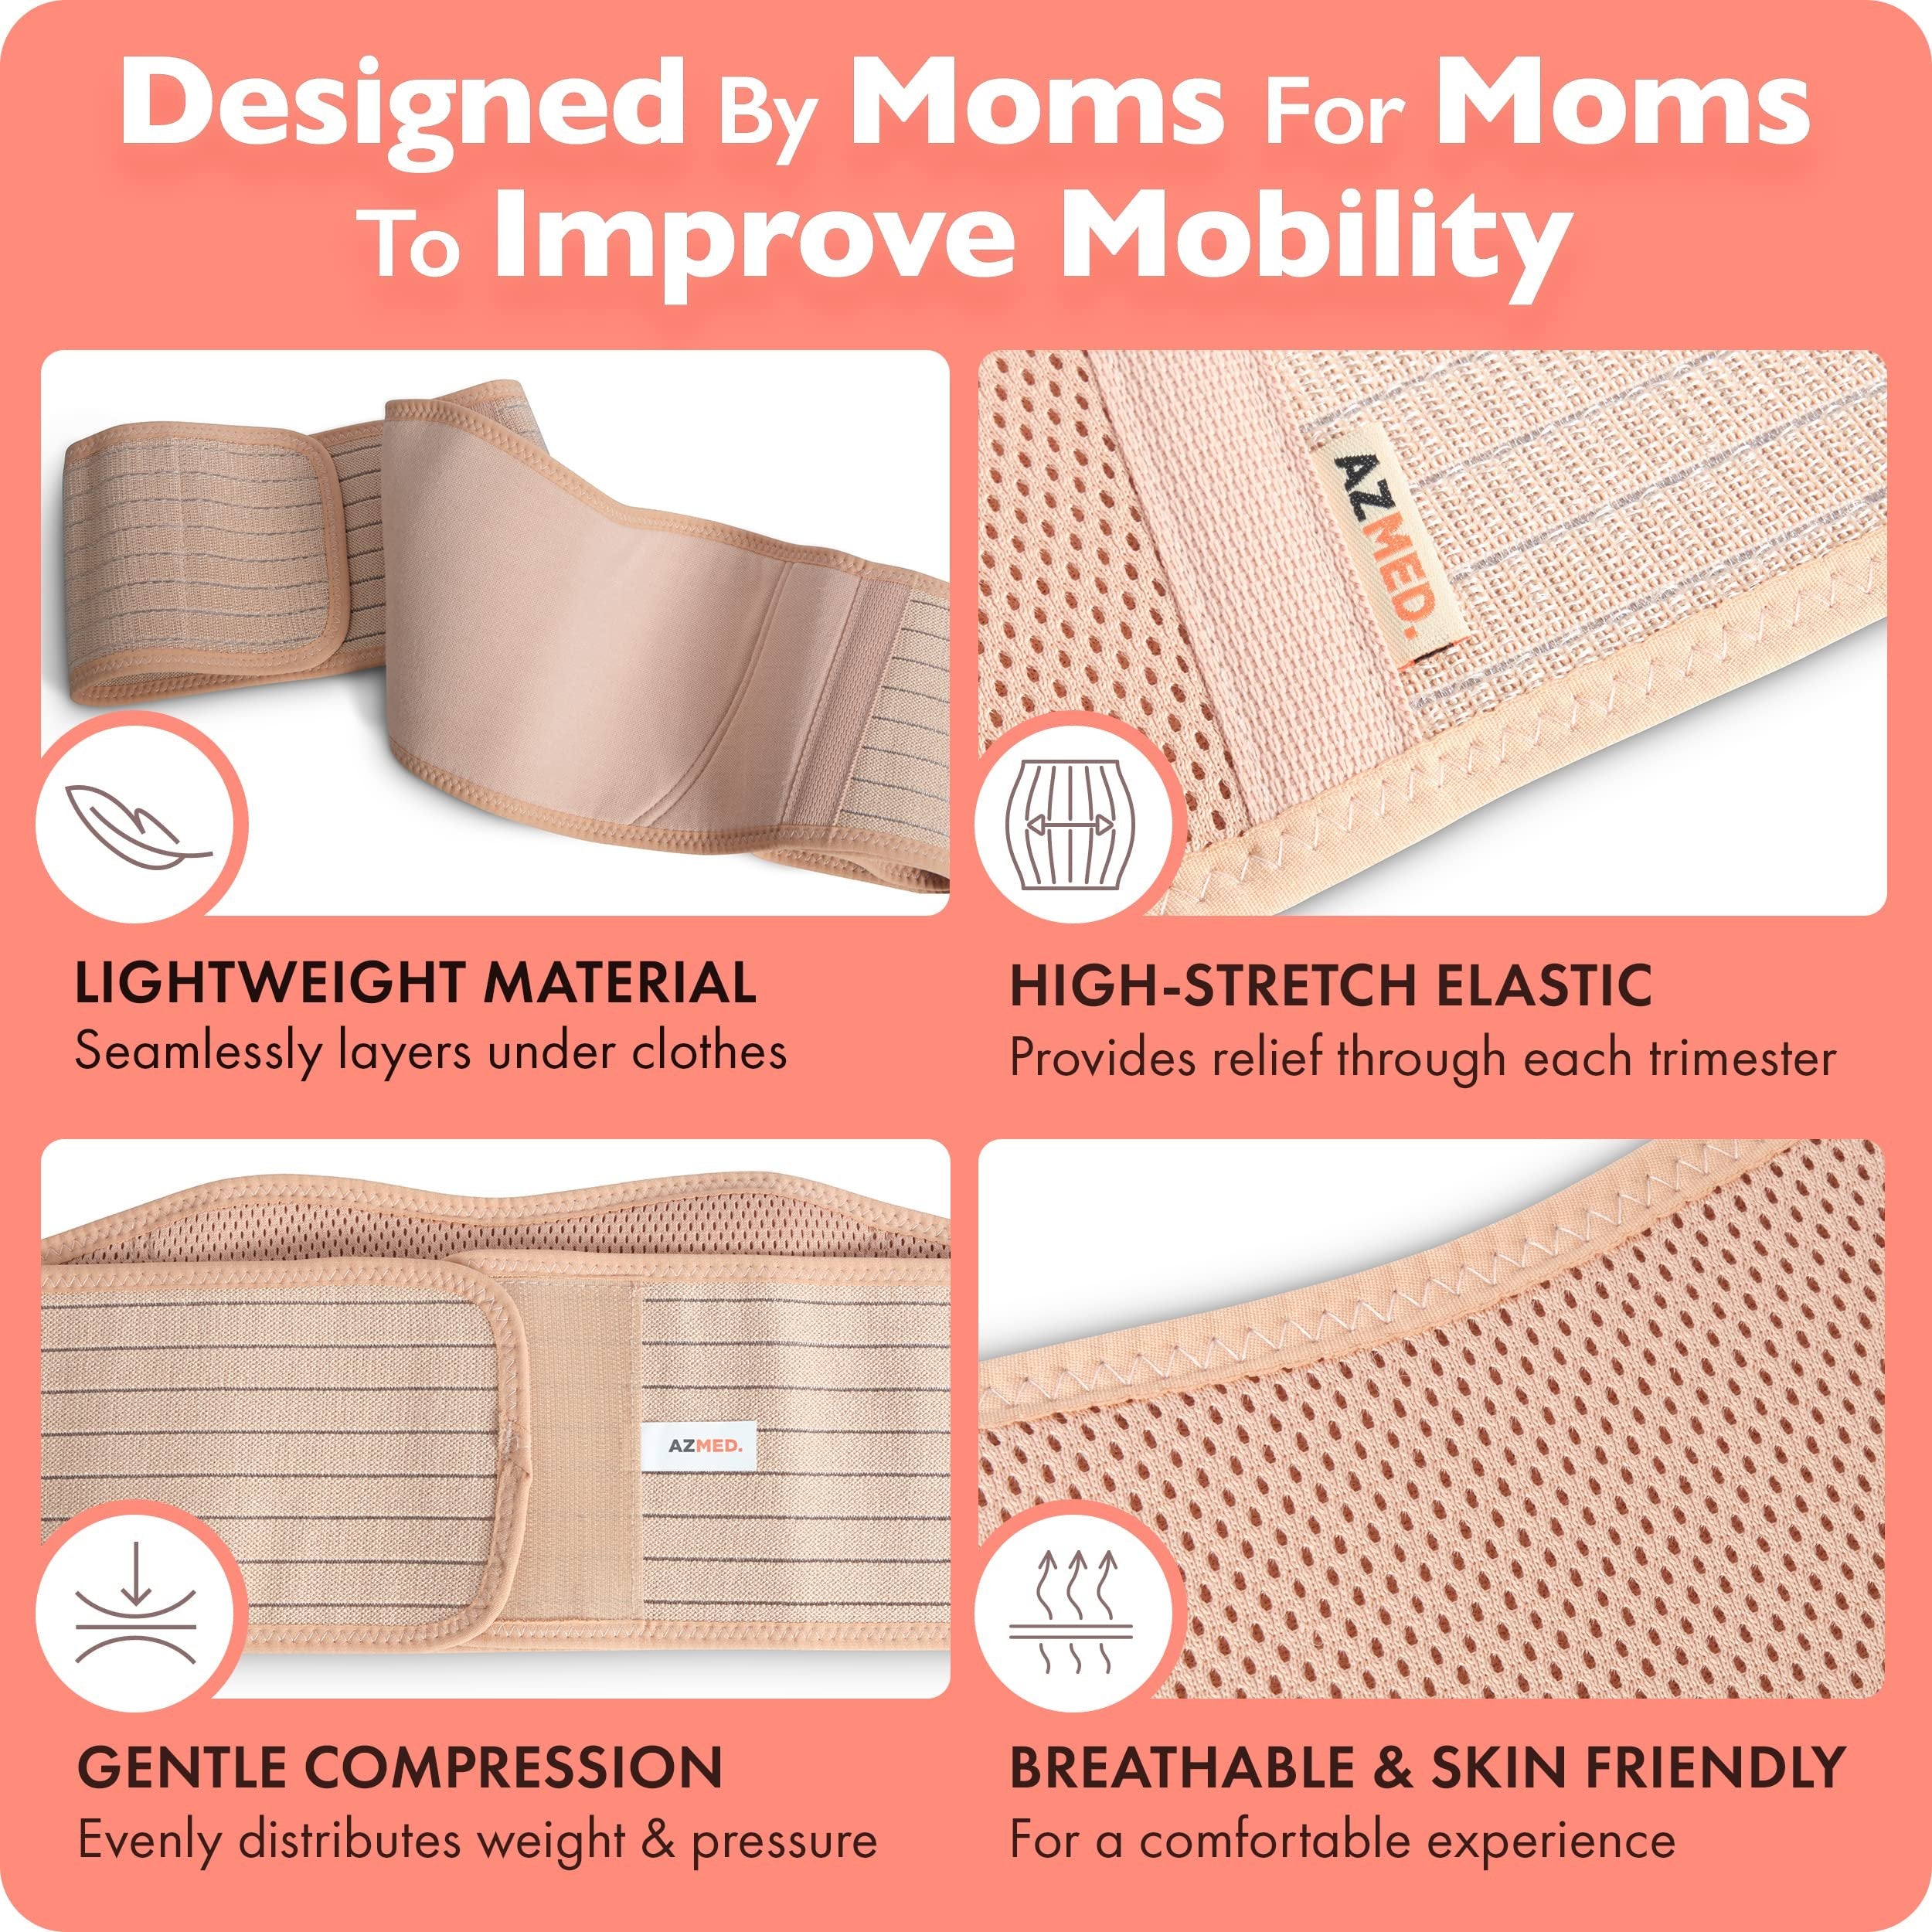 AZMED Maternity Belly Band | Adjustable Belt for All Stages of Pregnancy & Postpartum | Beige Support for Abdomen, Pelvic, Waist & Back Pain | Size [insert size] | Free Shipping & Returns